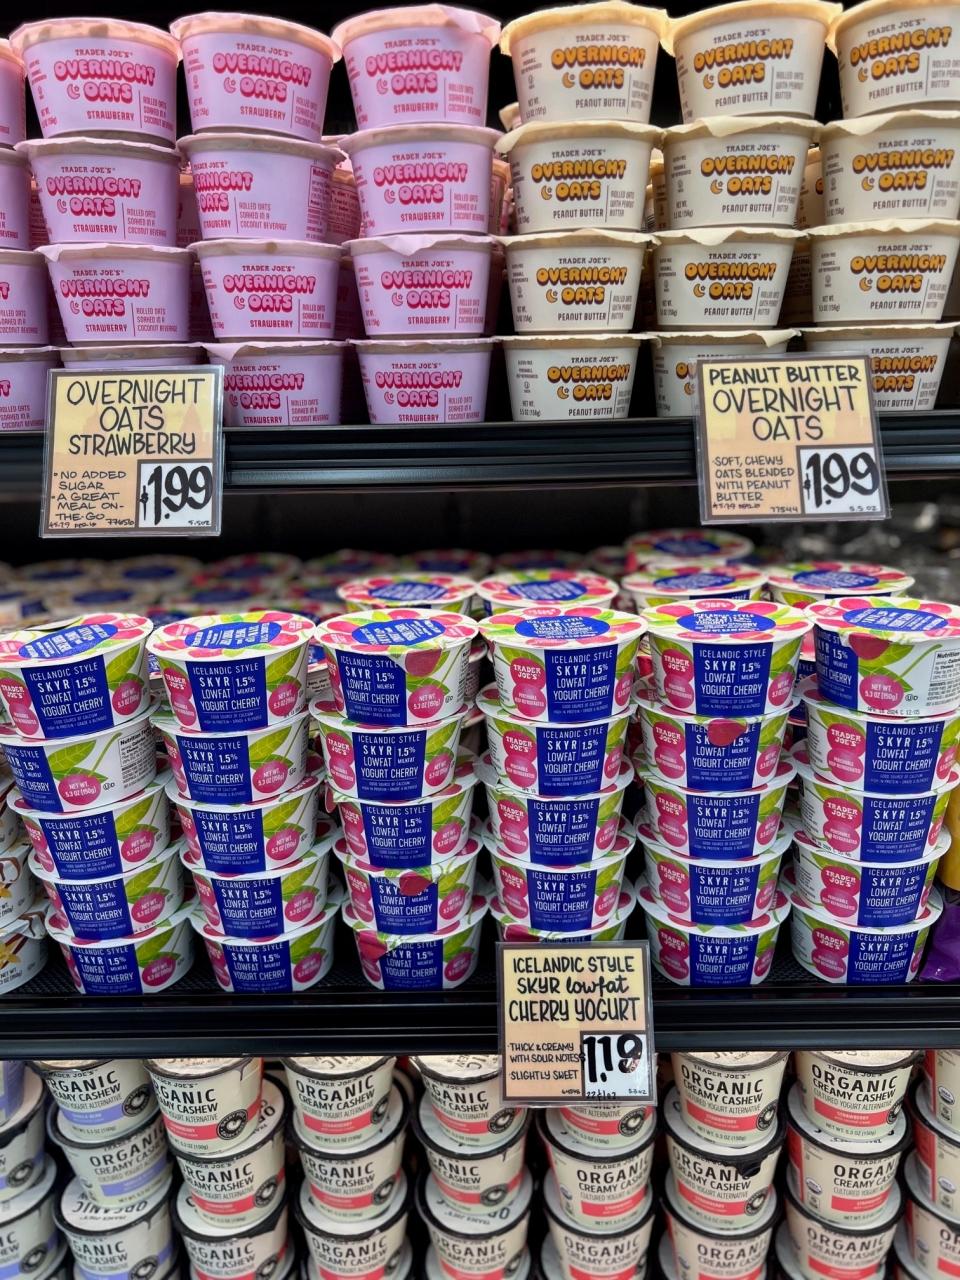 Shelves stocked with various flavors of yogurt and overnight oats in a grocery store